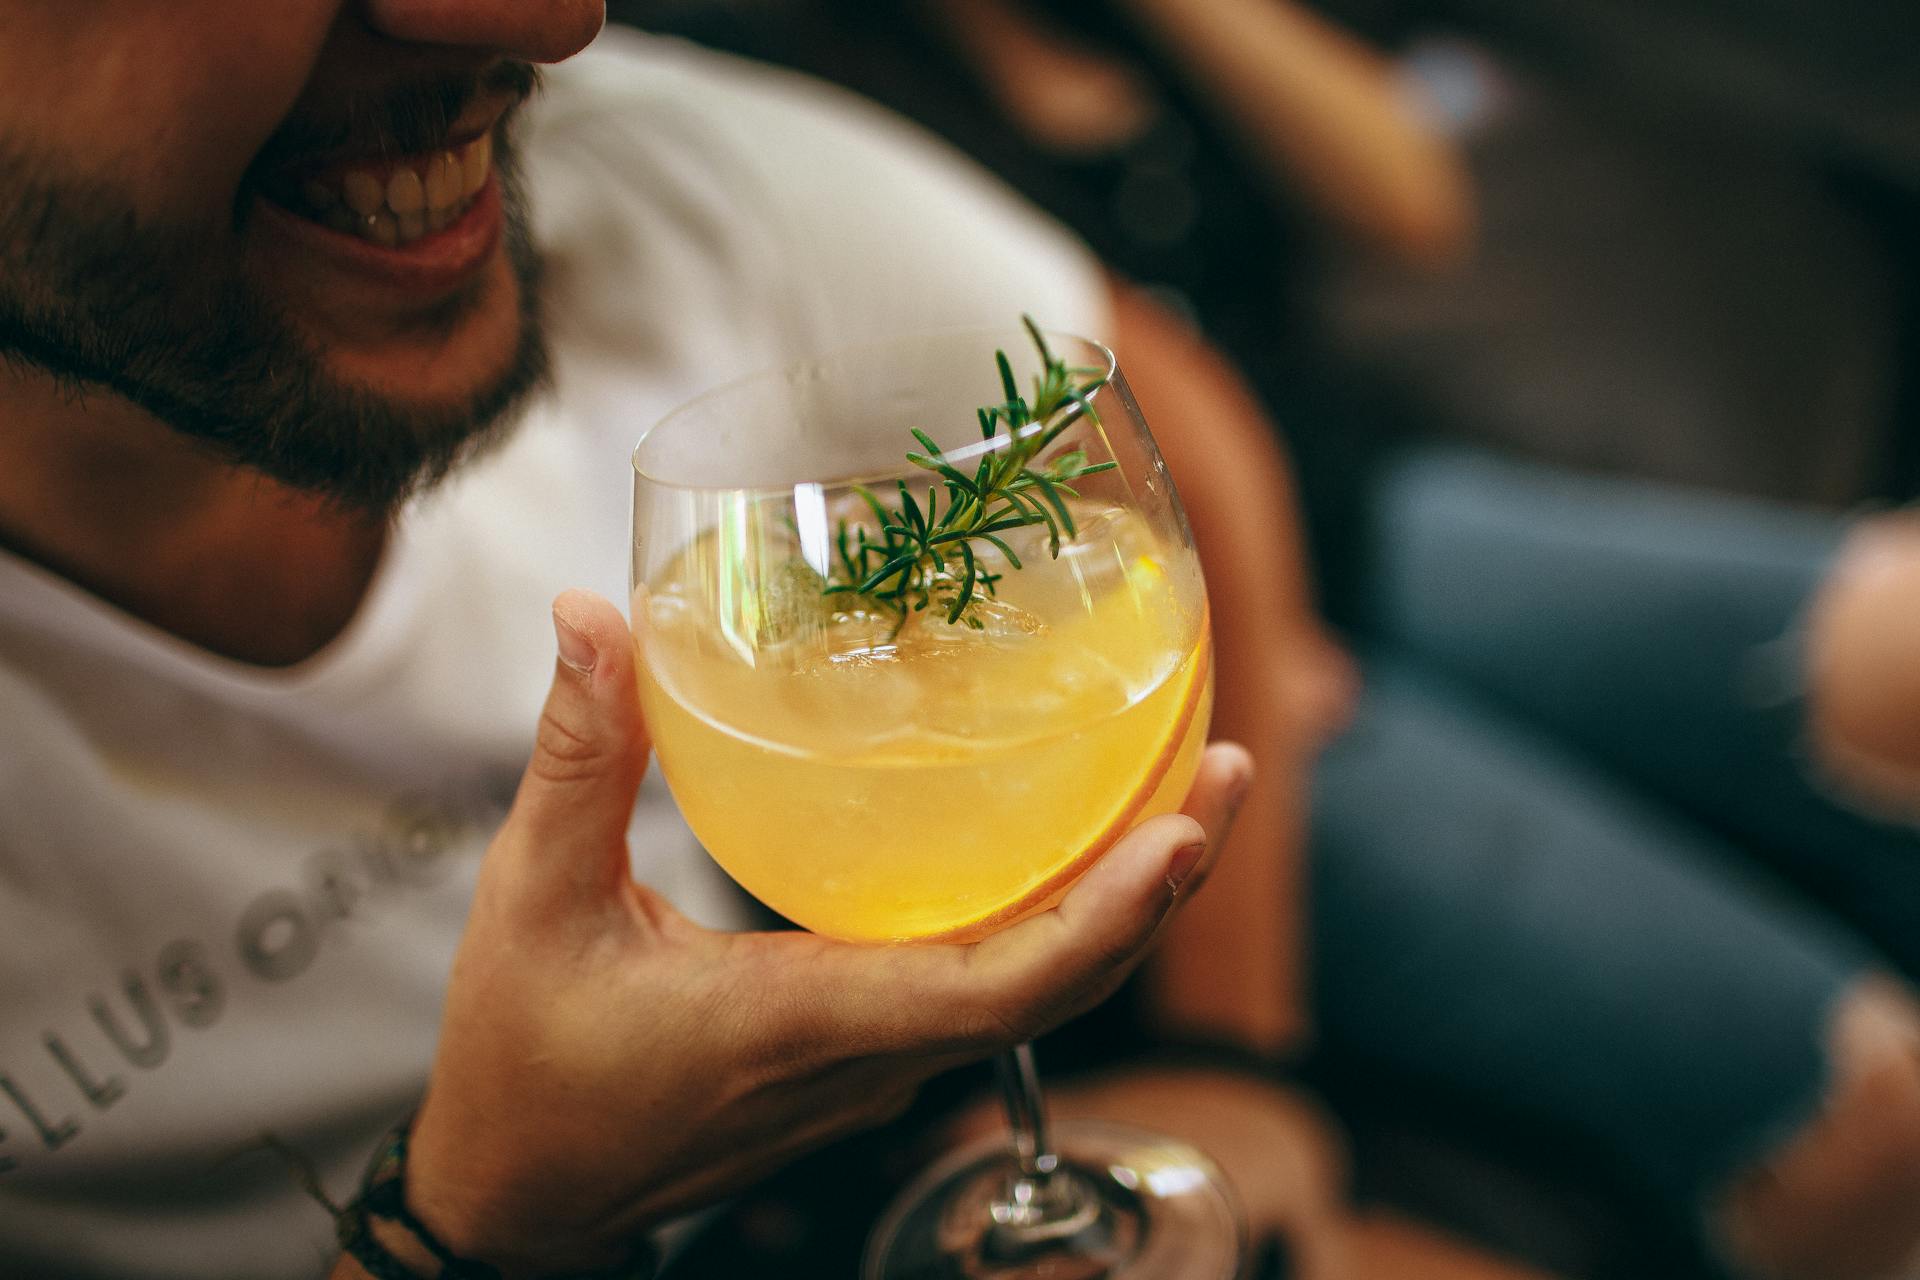 A grinning man holding a drink | Source: Pexels